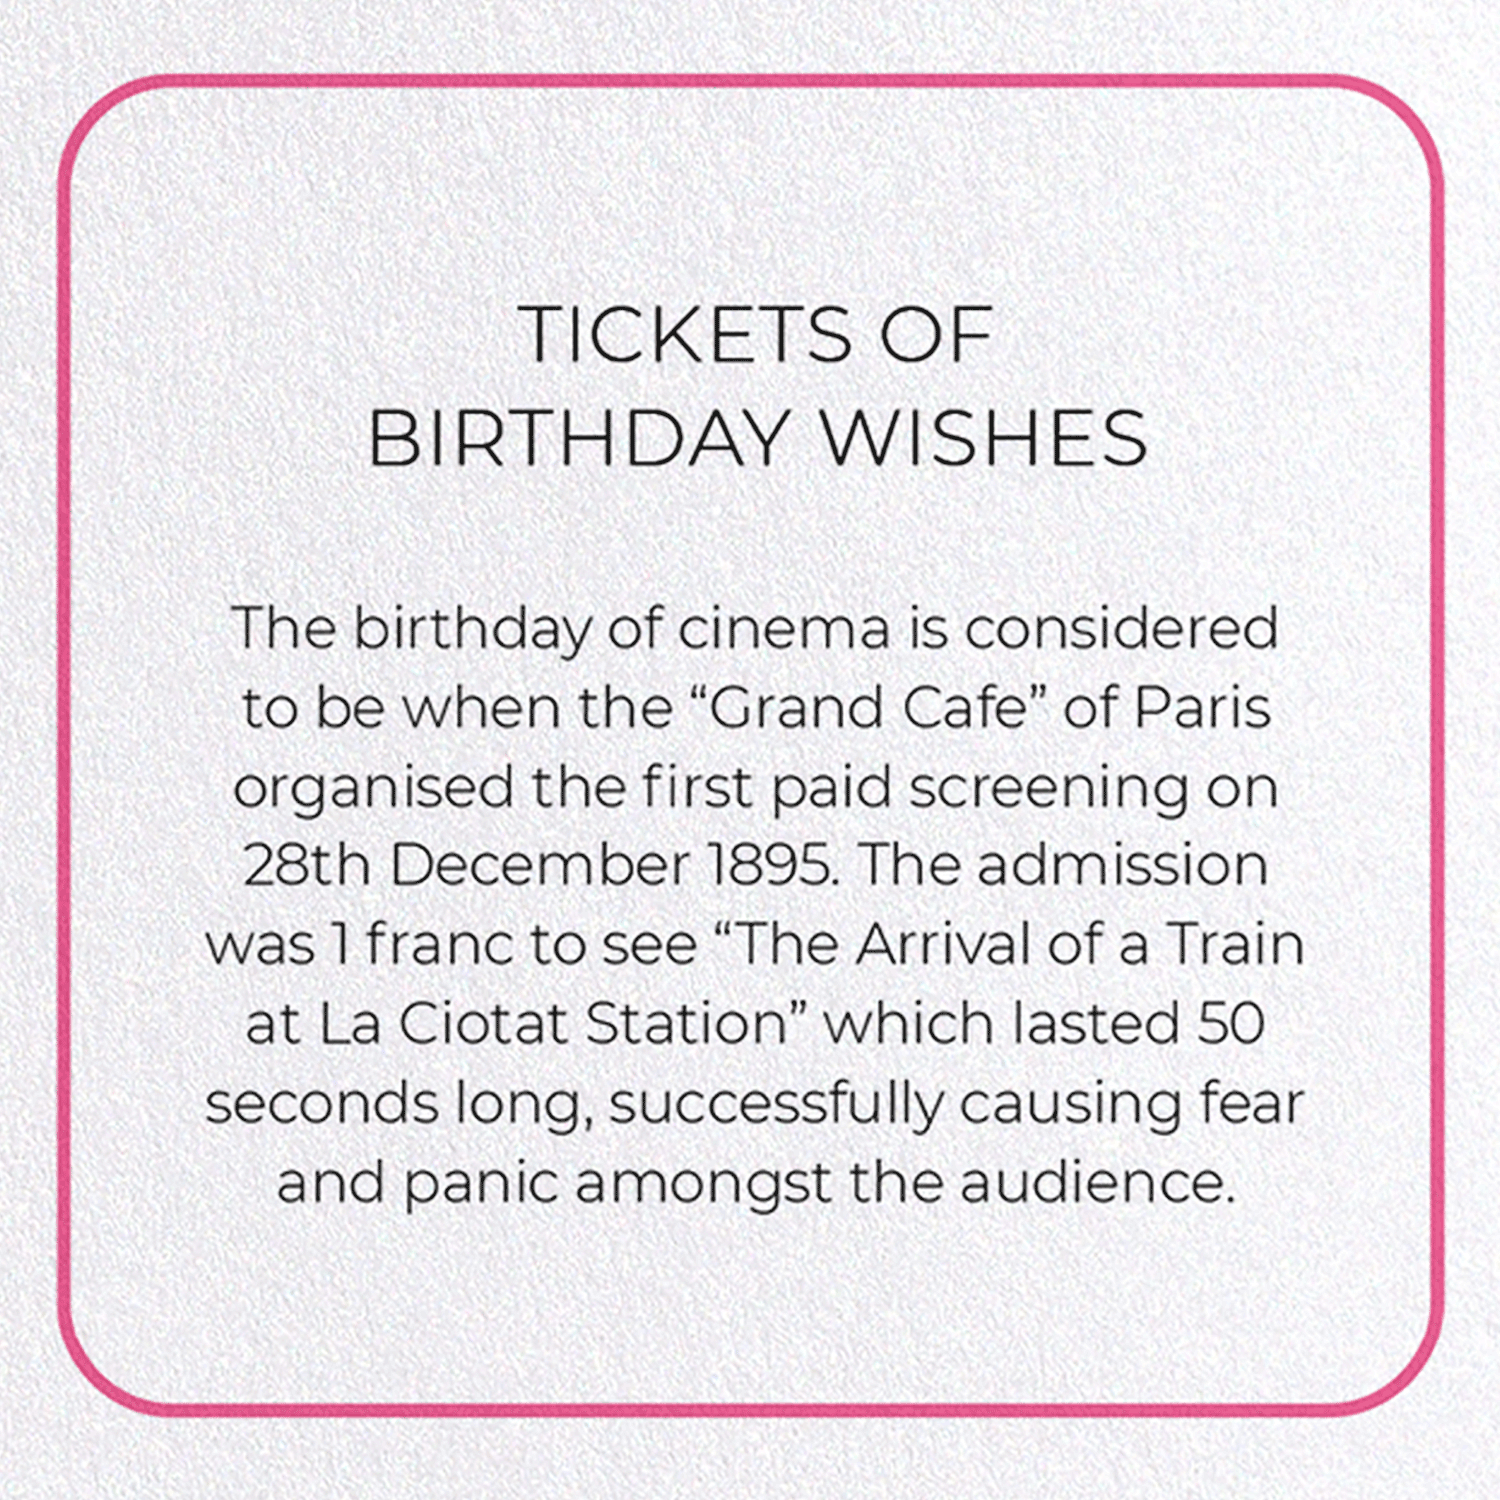 TICKETS OF BIRTHDAY WISHES: Photo Greeting Card